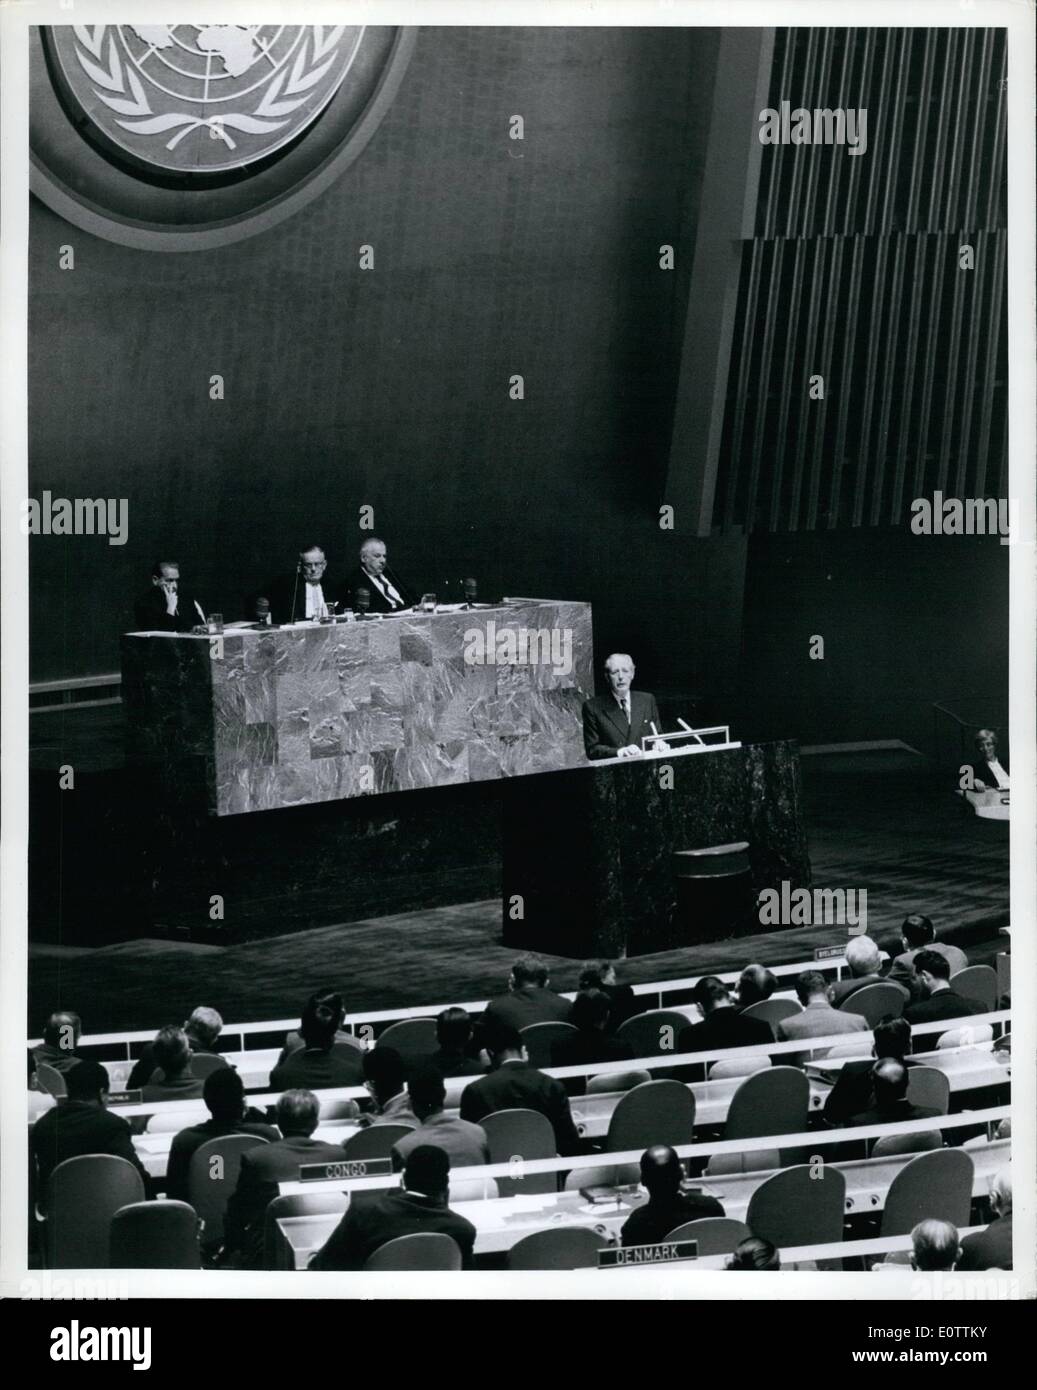 Sep. 09, 1960 - UN General Assembly Continues General Debate: The General Assembly continued general debate today. An unprecedented number of high officials are attending this session which has before it an 87-item provisional agenda, the longest in its history. Here is a view of a section of the Assembly Hall as Prime Minister Harold MacMillan (at speaker's desk), of the United Kingdom, addressed this morning's plenary meeting. On the presidential rostrum (behind speaker) are (l. to r.) : U.N. Secretary-General Dag Hammarskjold; Assembly President Dag Hammarskjold Stock Photo